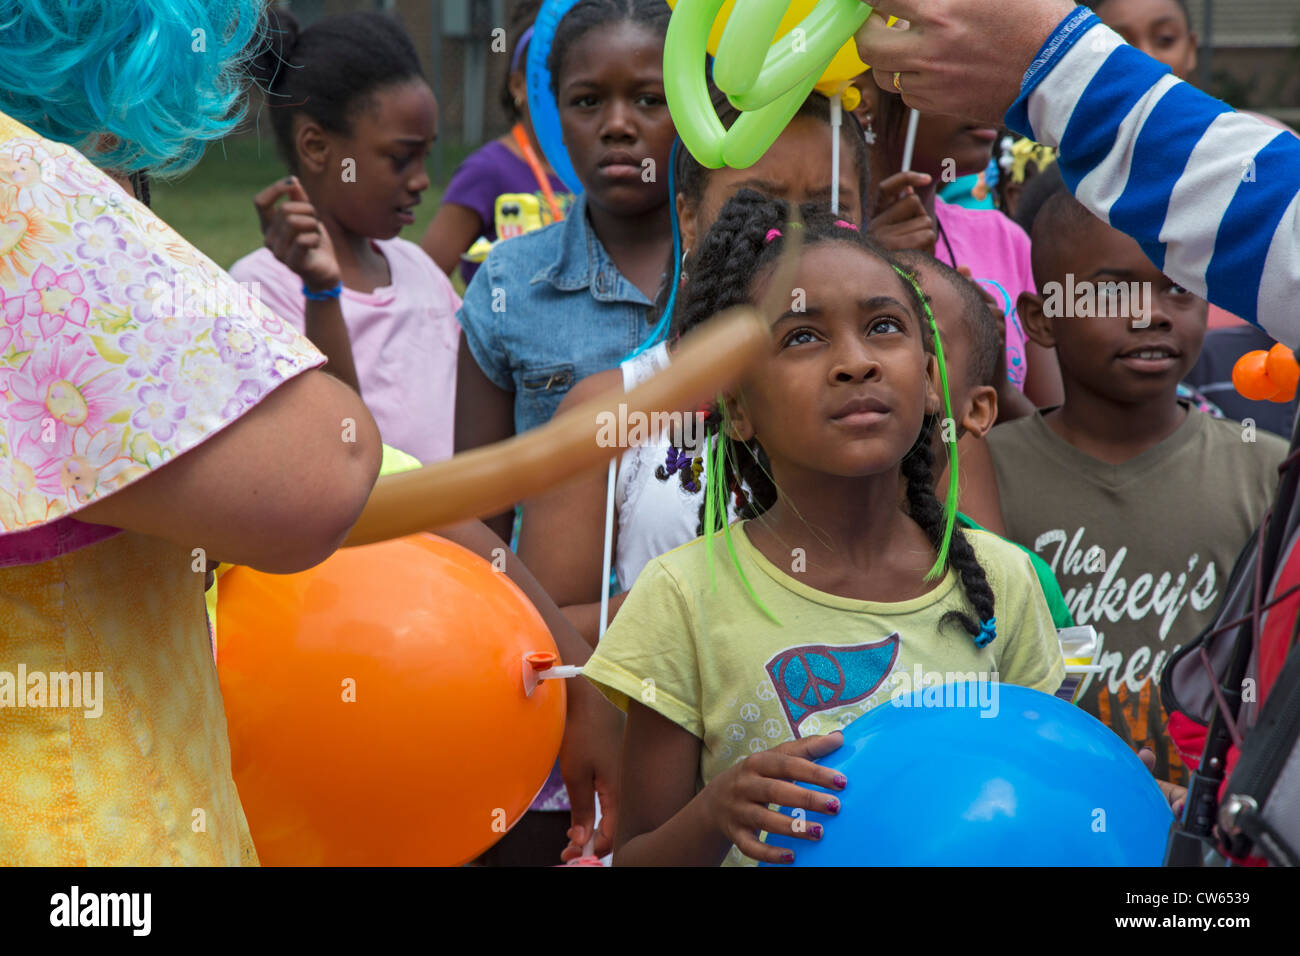 Detroit, Michigan - A Block Party for children at the Boys & Girls Club featured a free lunch, face painting, clowns, and games. Stock Photo